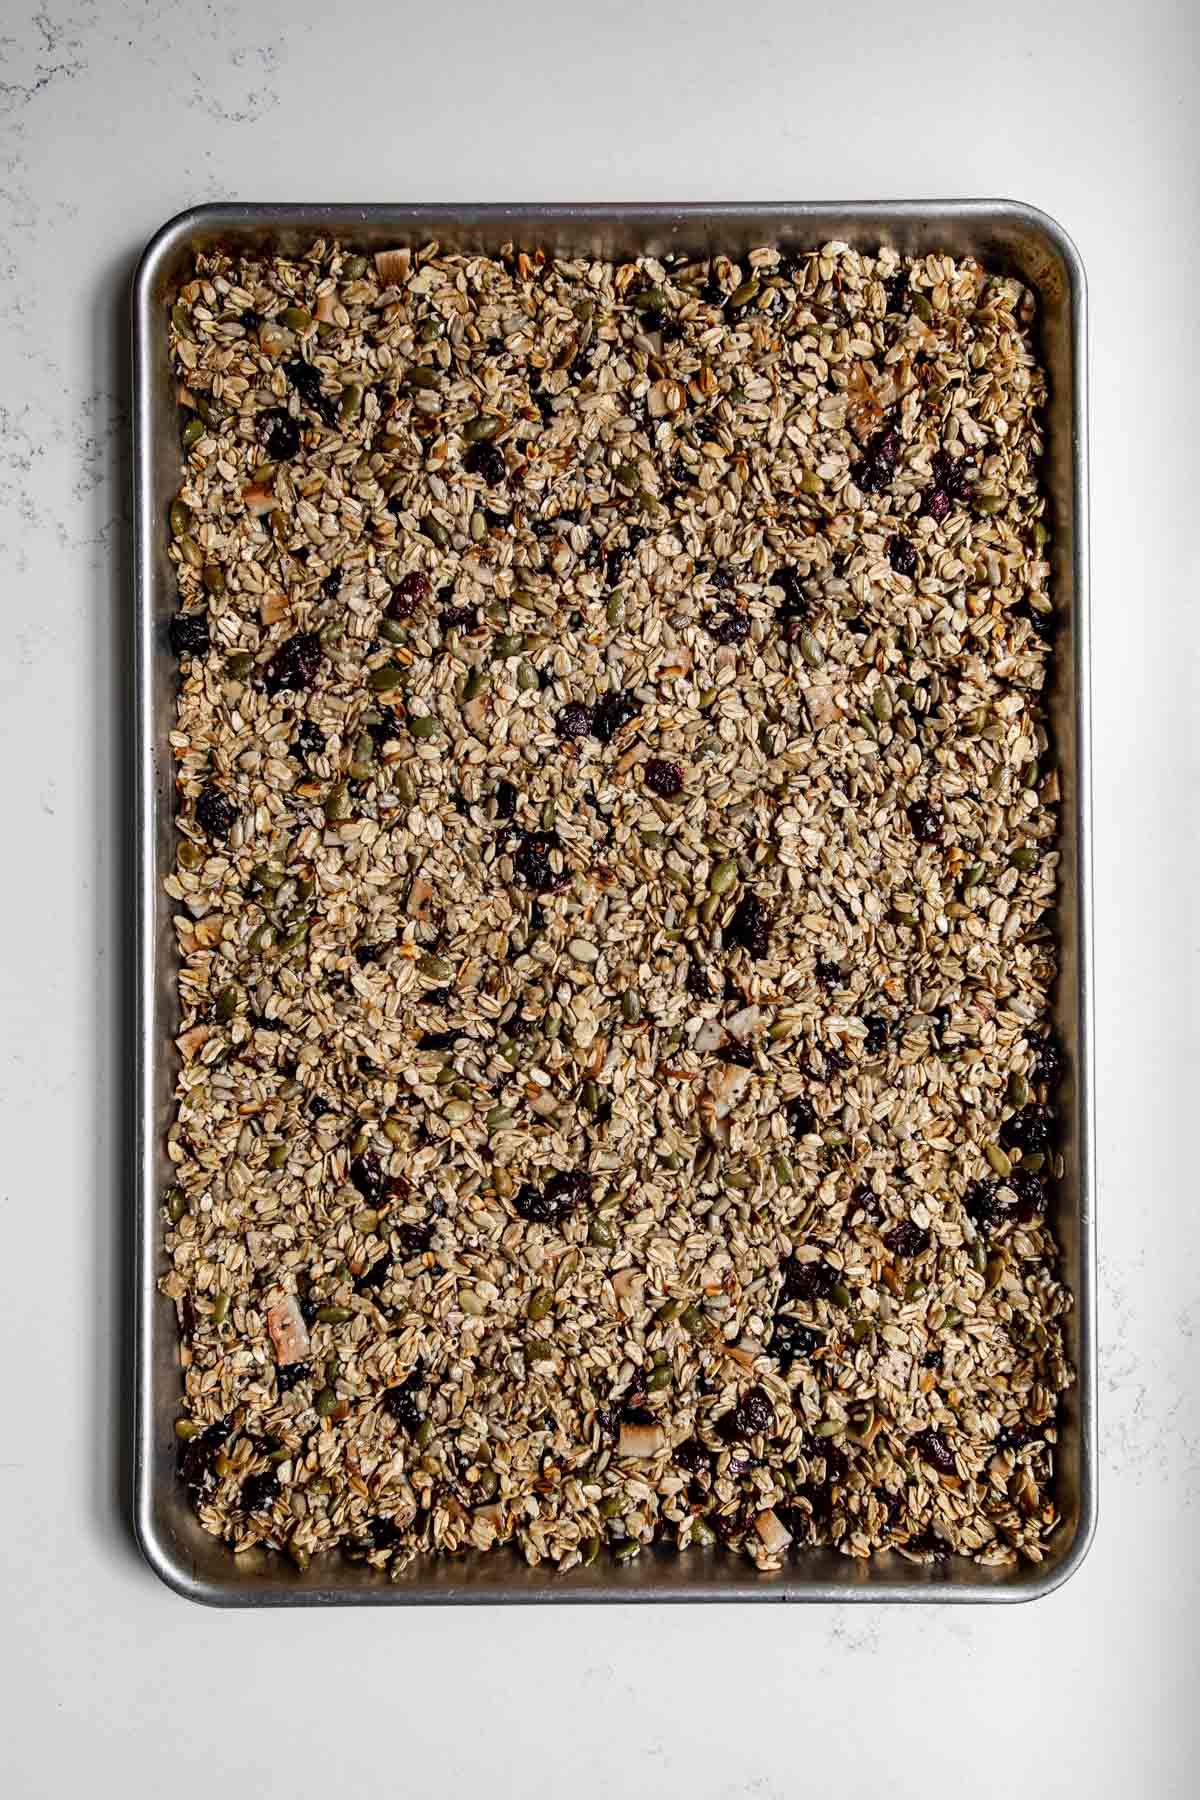 nut free granola spread out on a sheetpan.